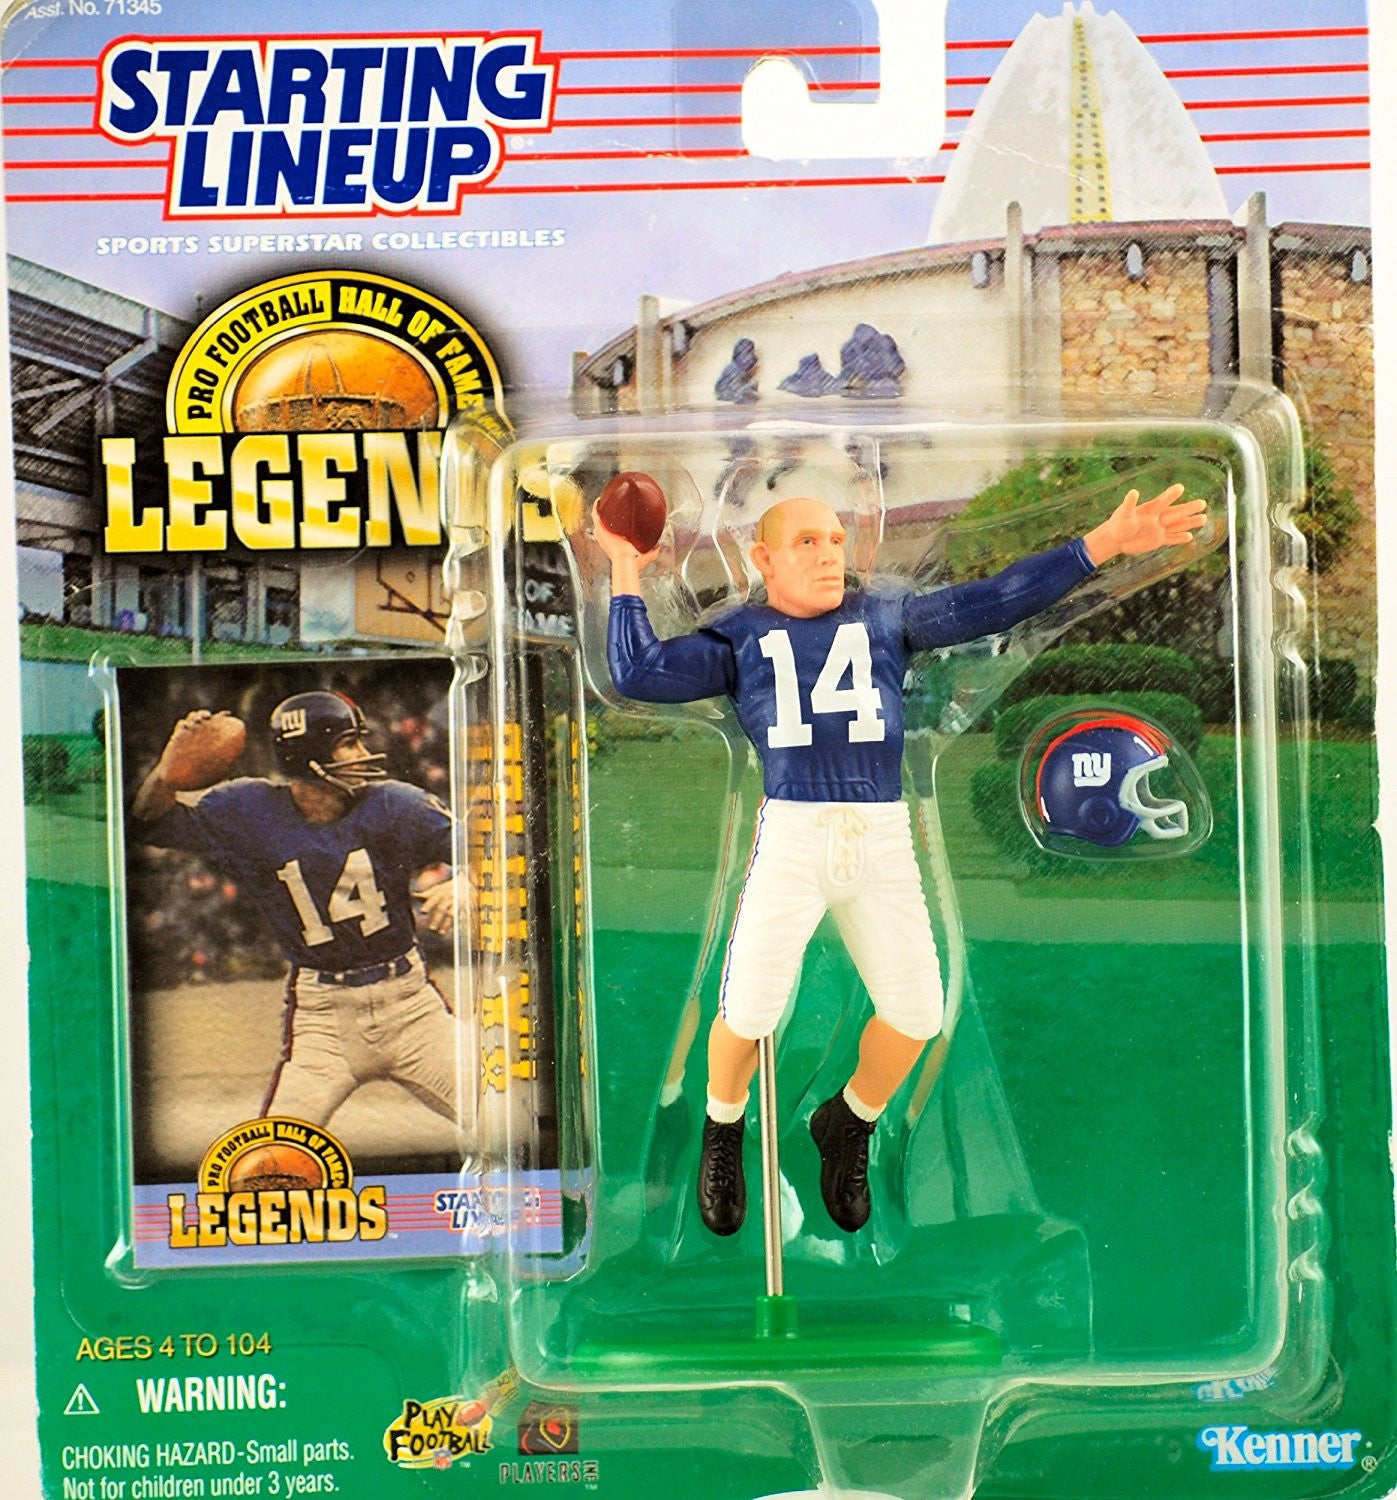 1998 Starting Lineup - Pro Football HOF Legends - Y.A. Tittle #14 - QB - New York Giants - Vintage Action Figure - w/ Trading Card - Limited Edition